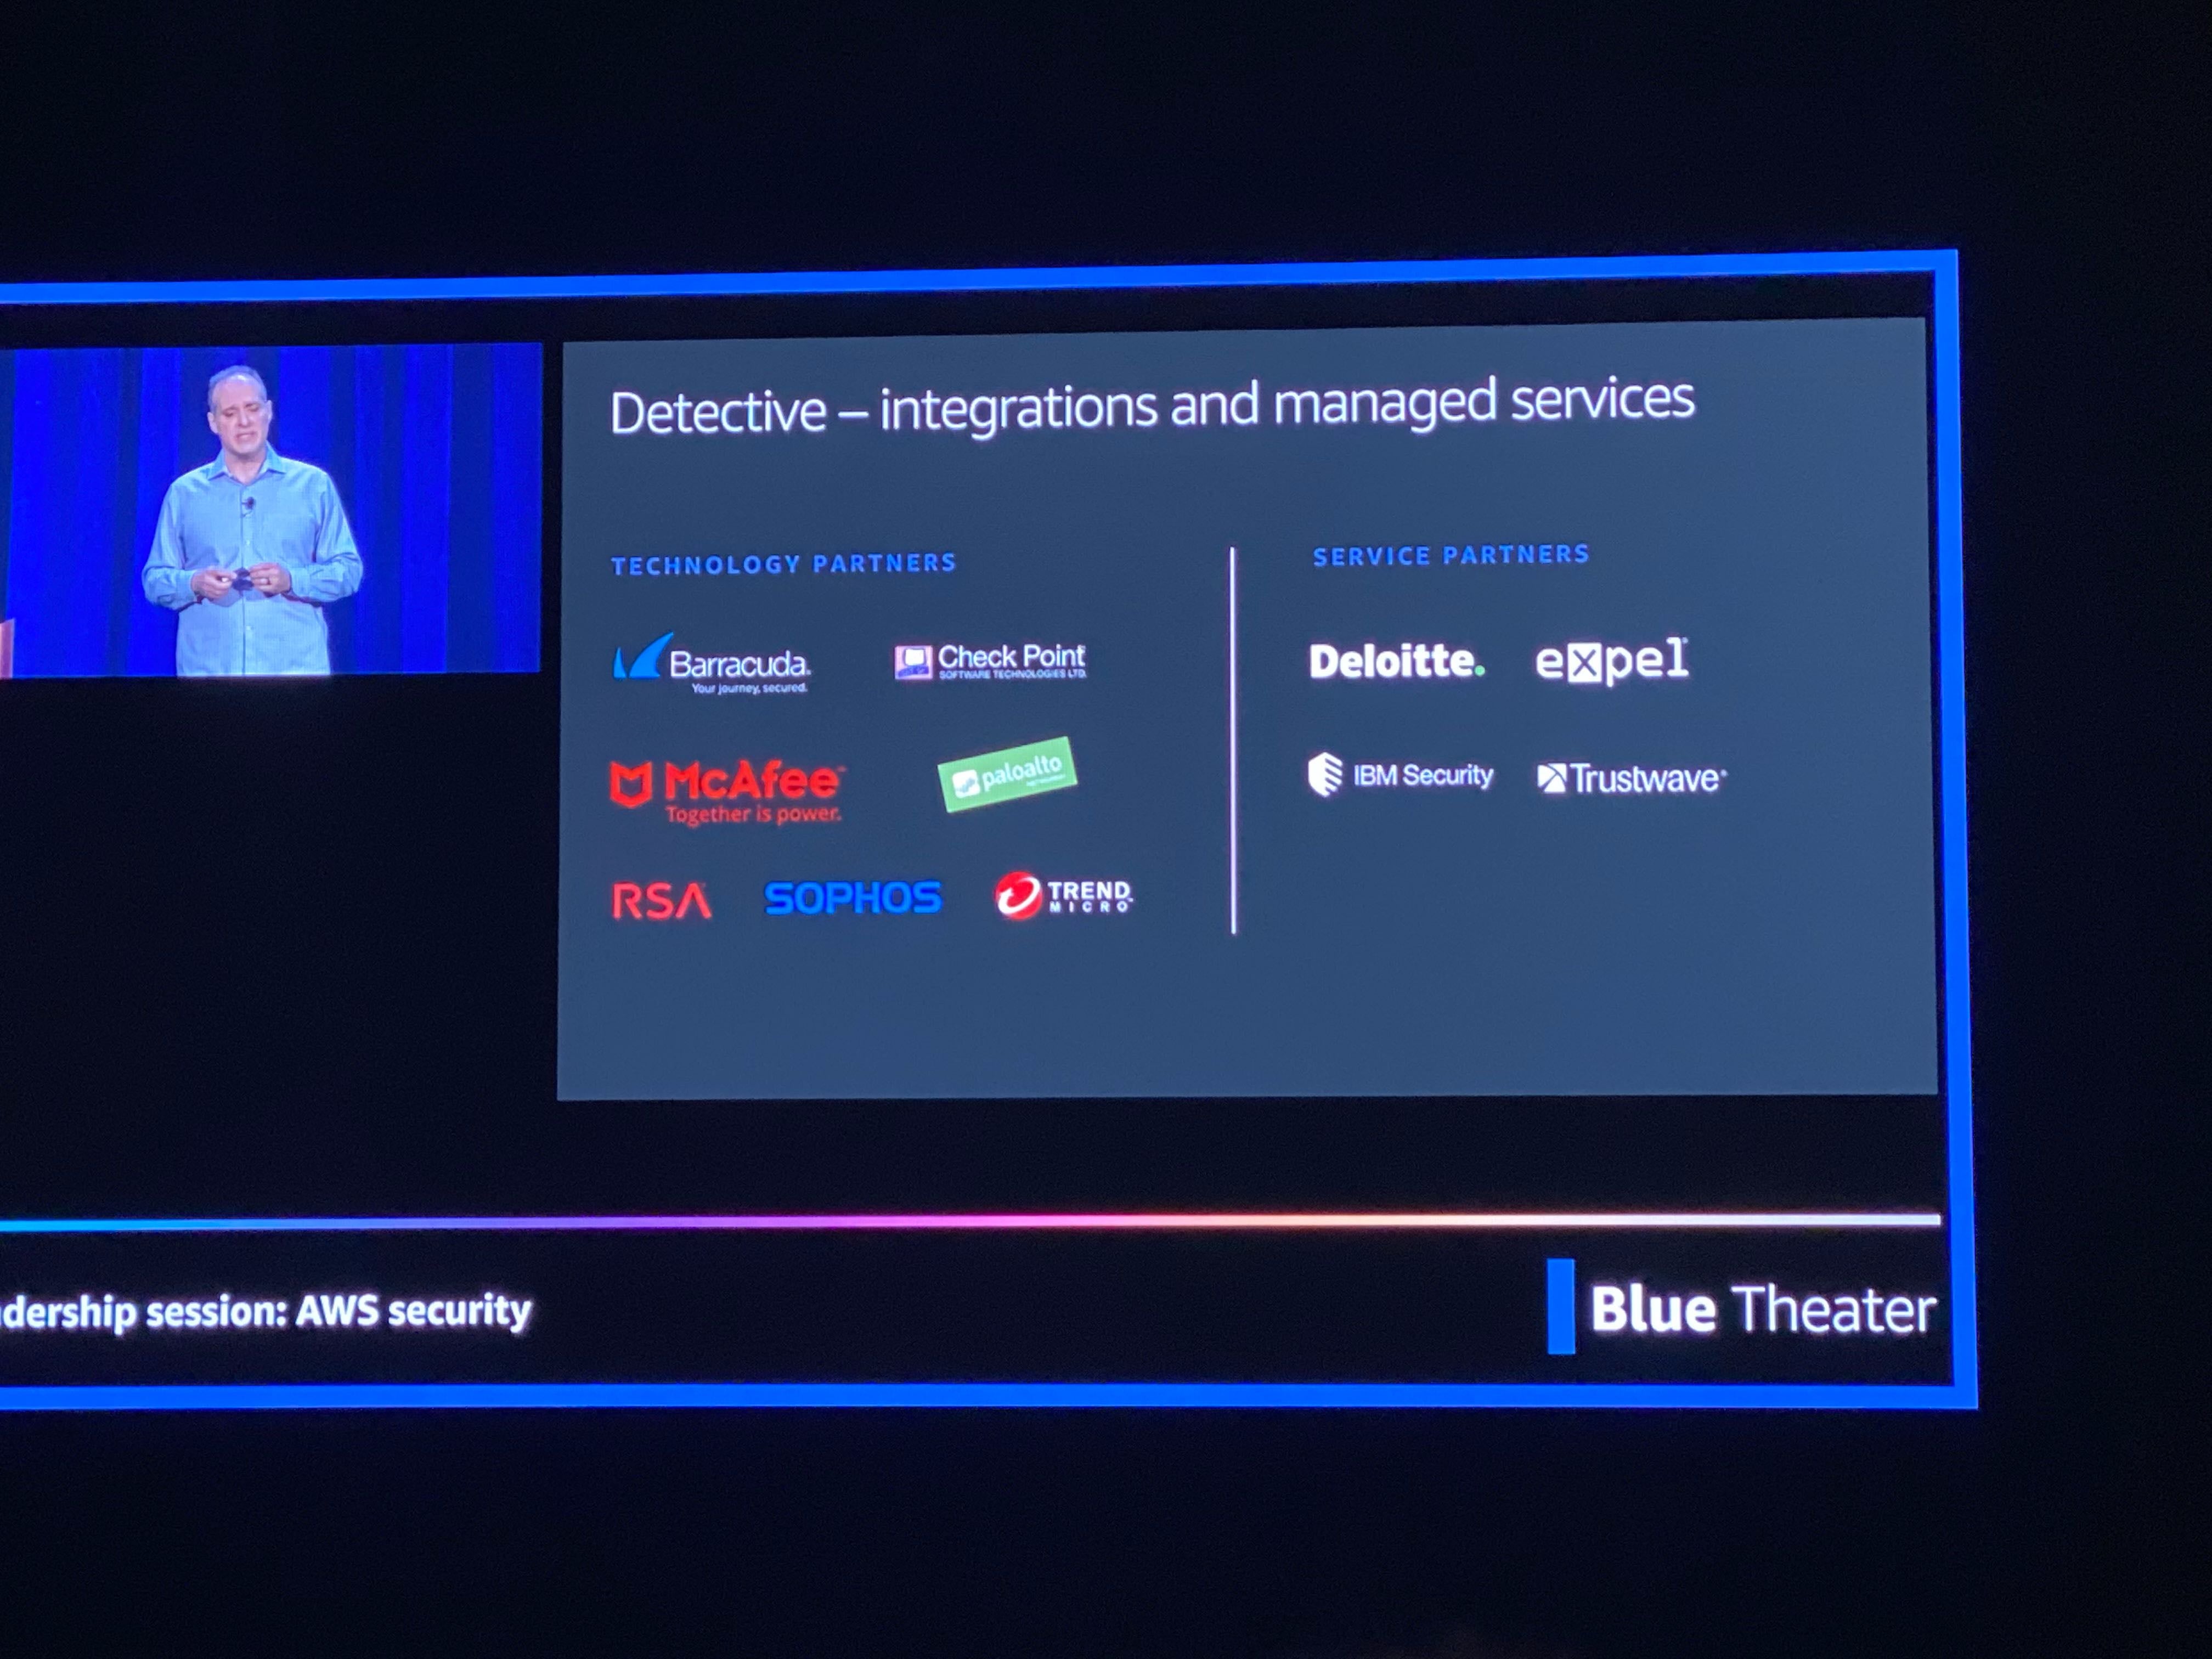 AWS CISO Steve Schmidt talks about Amazon Detective during re:Invent 2019; Expel is named as a service partner.